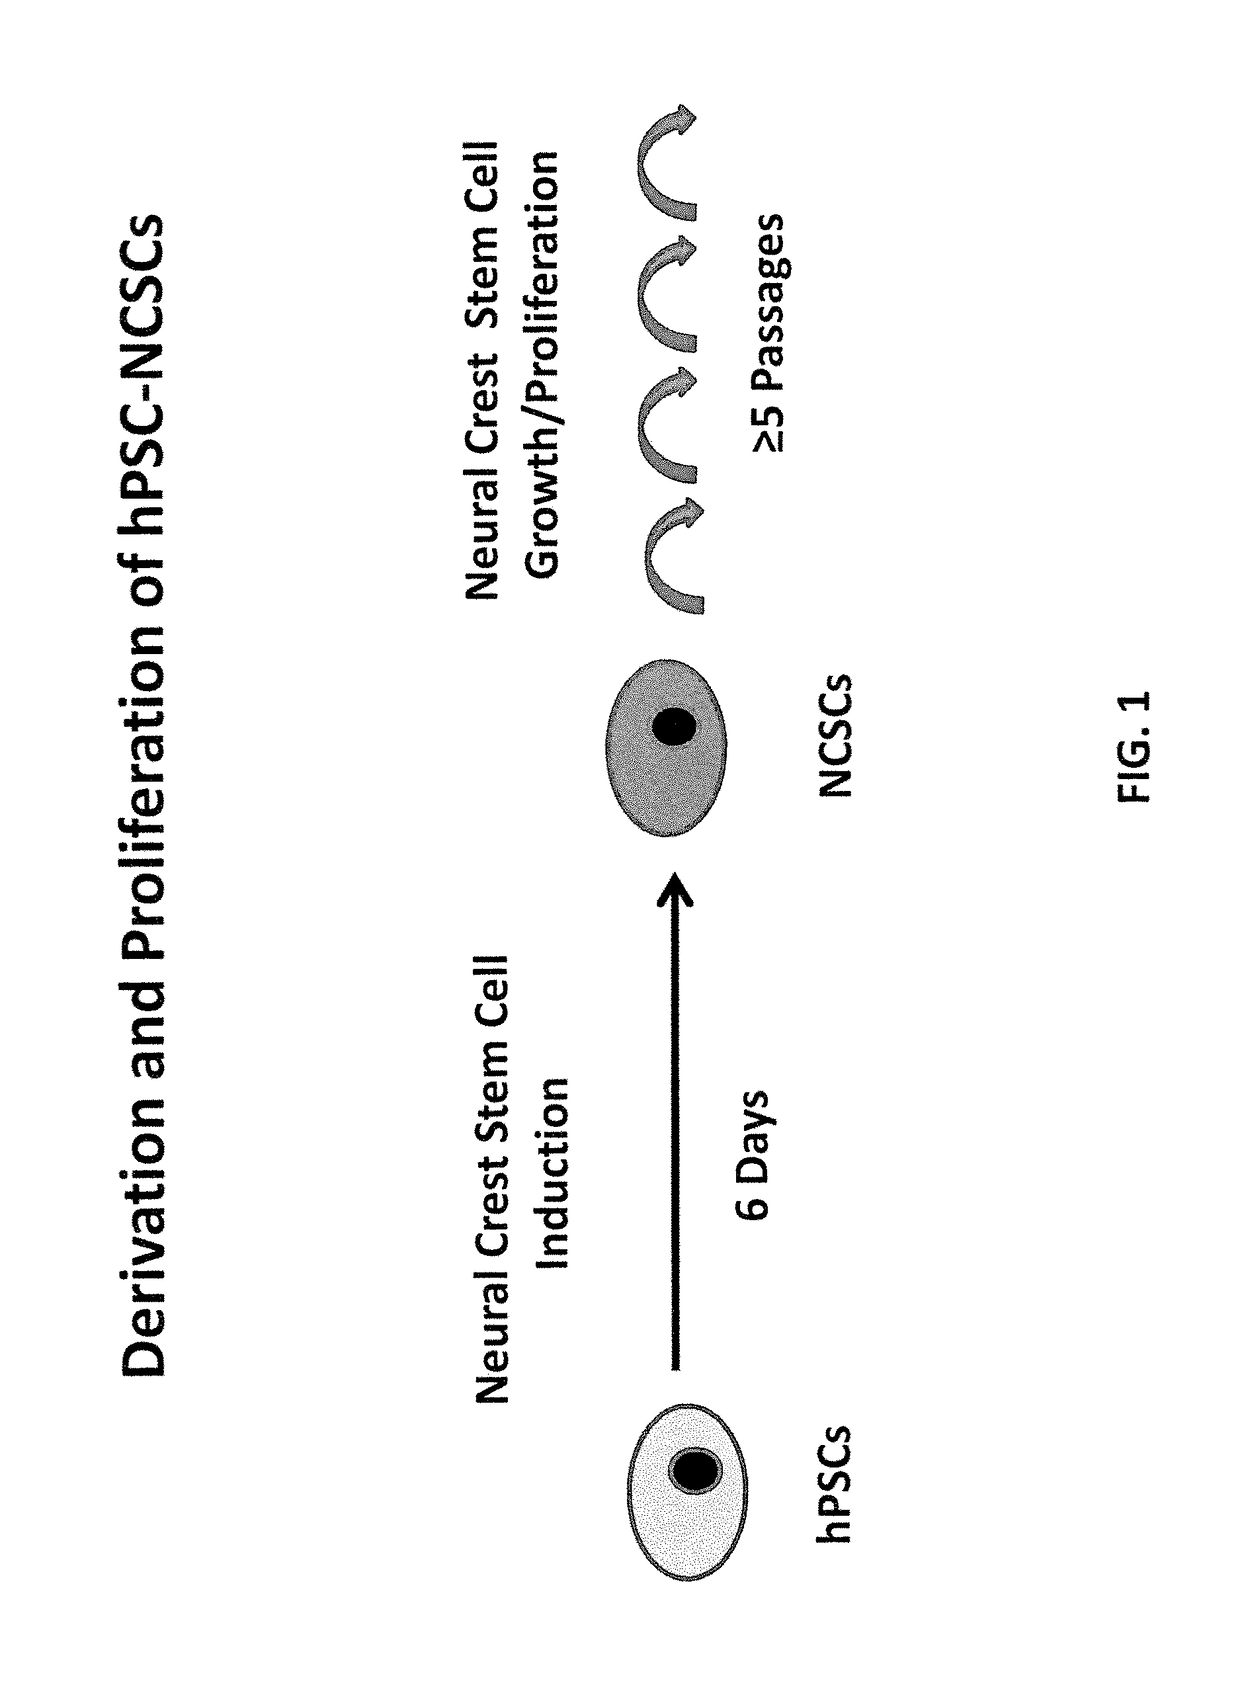 Derivation of neural crest stem cells and uses thereof